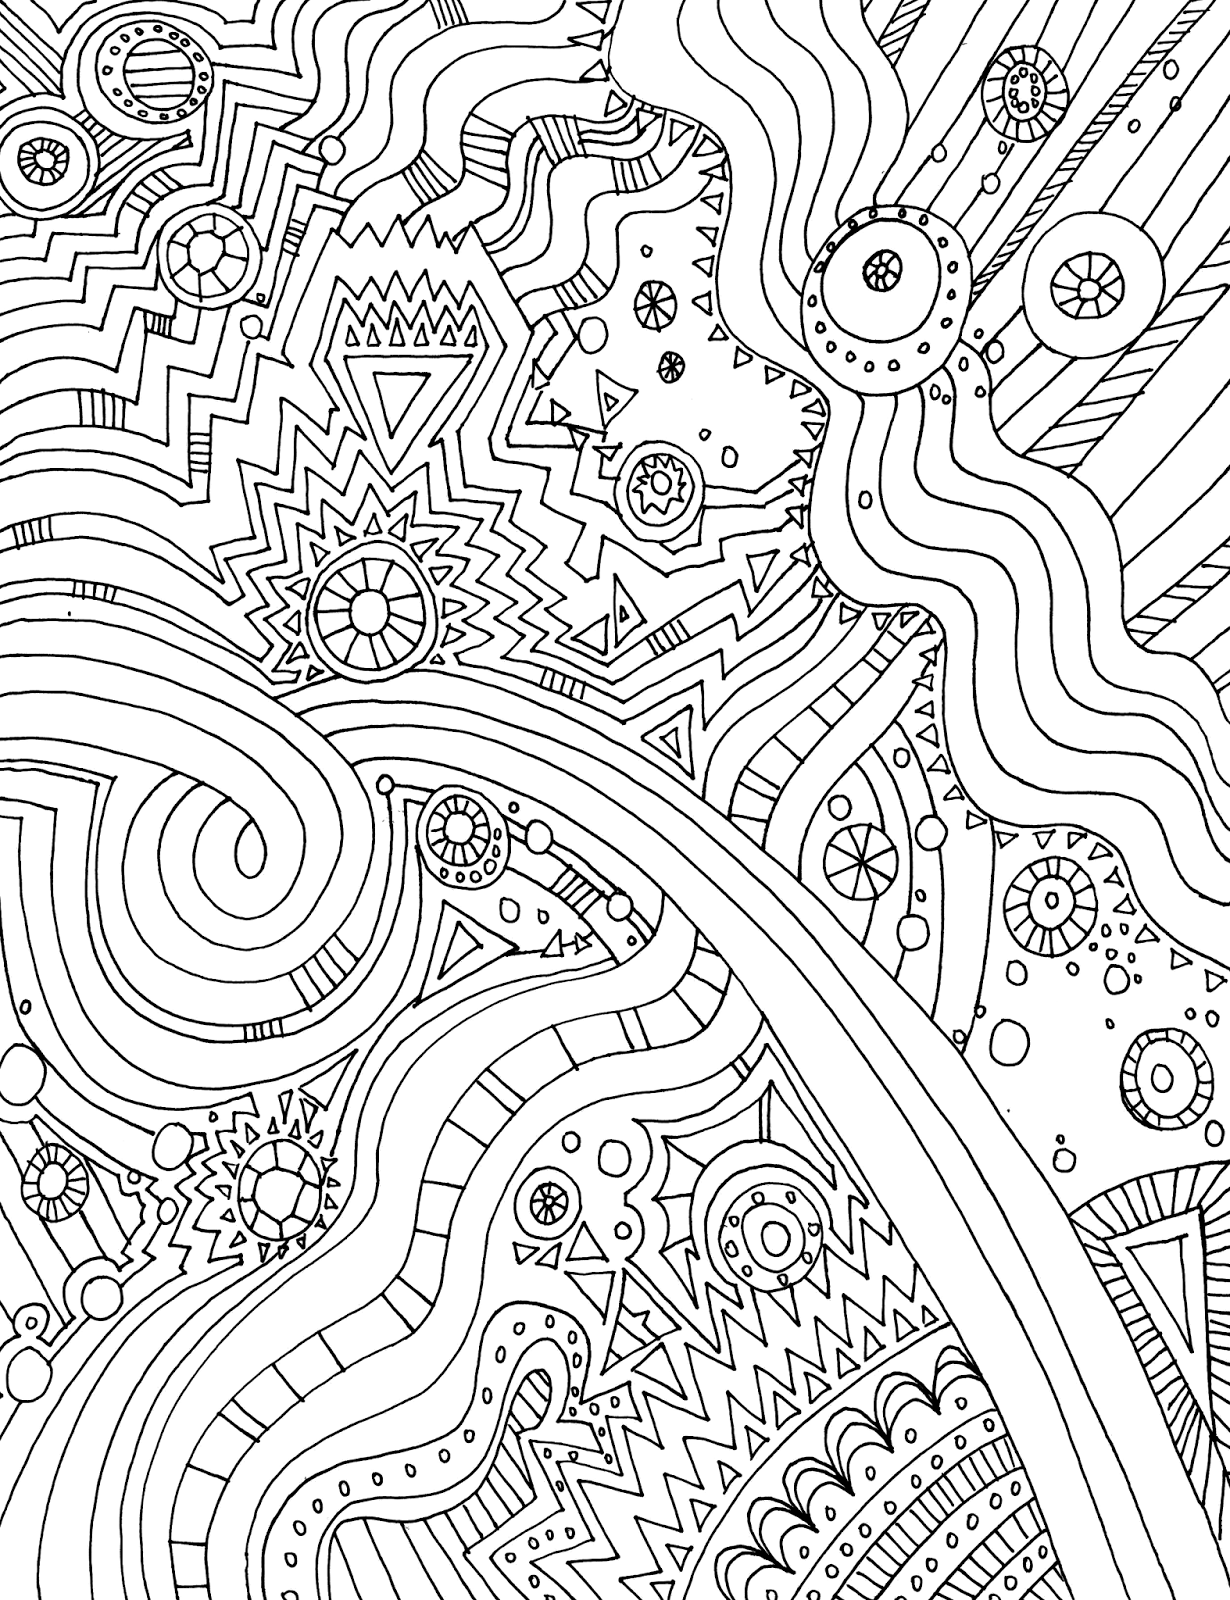 Printable Doodle Coloring Pages